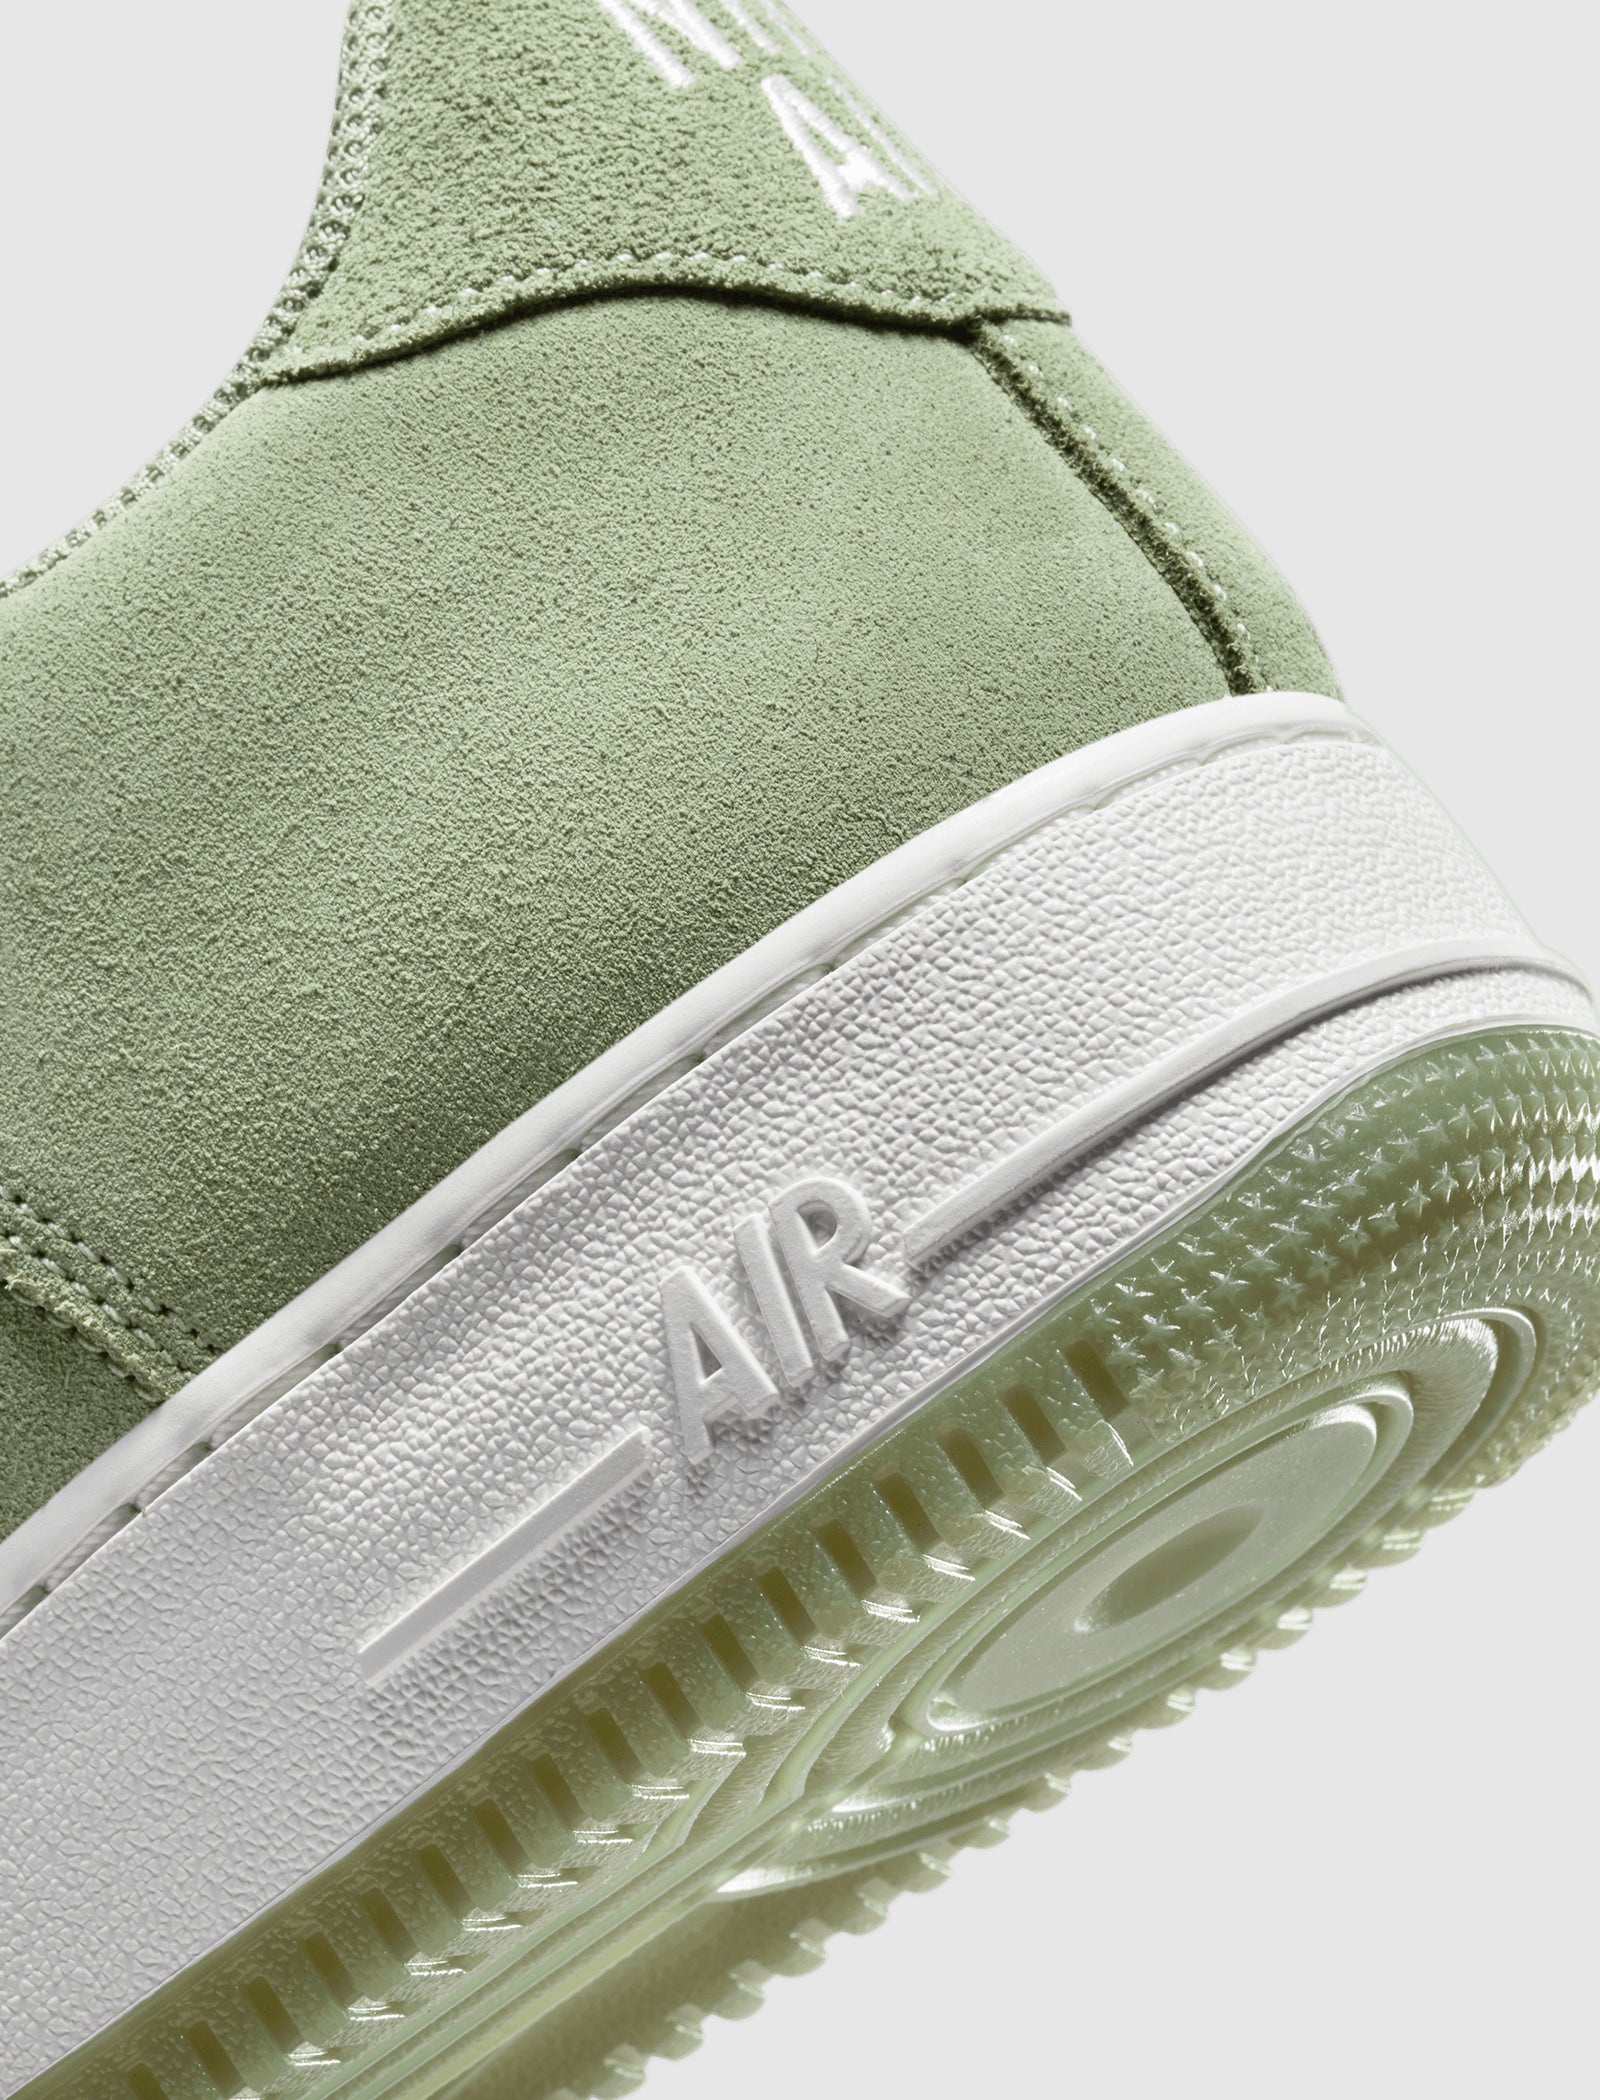 Nike Air Force 1 Boot Oil Green Sneakers - Farfetch